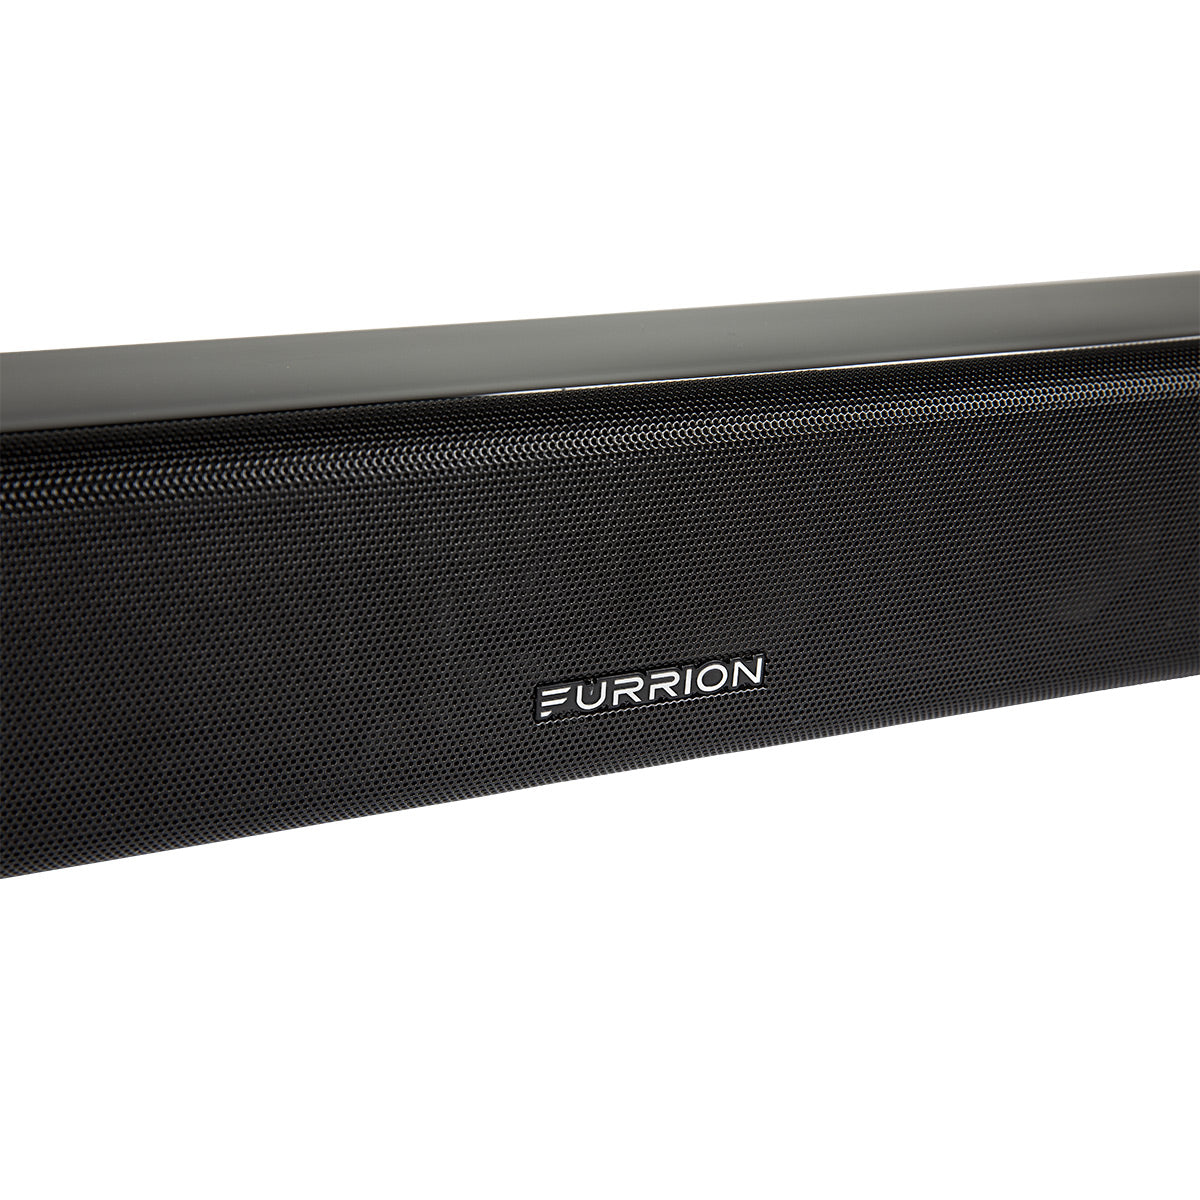 Furrion Aurora 130W 2.1 Outdoor Sound System with 8" Wireless Subwoofer, Bluetooth, HDMI-ARC, & Optical Inputs